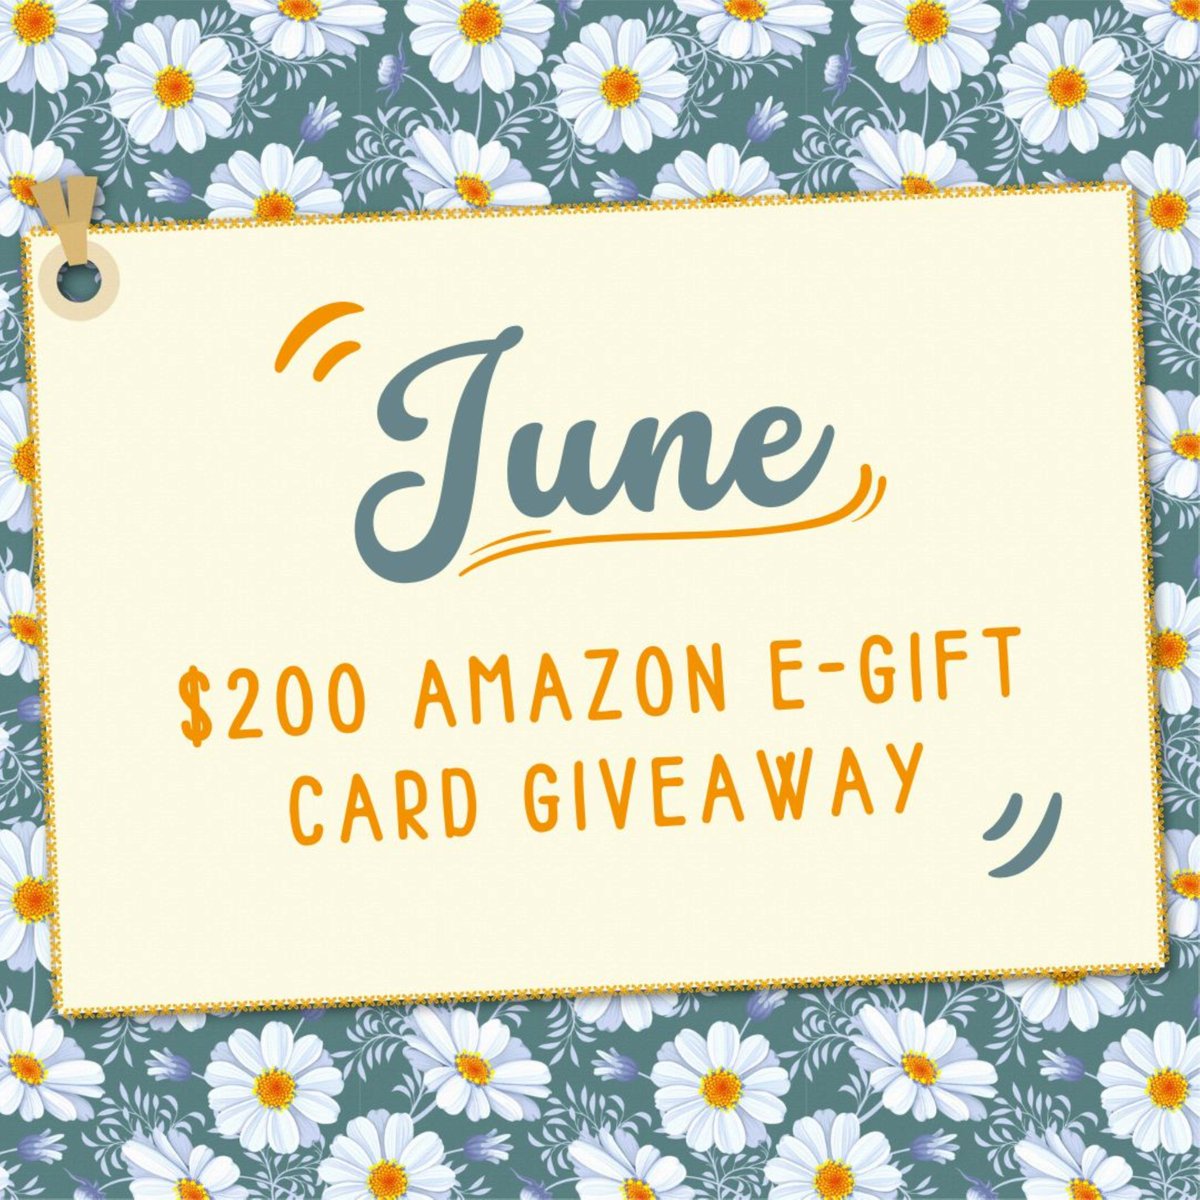 Hello June! Who's ready to #win a $200 Amazon e-gift card? Enter on the blog today! #AMAZONgiveaway mywahmplan.com/2023/05/winnin…